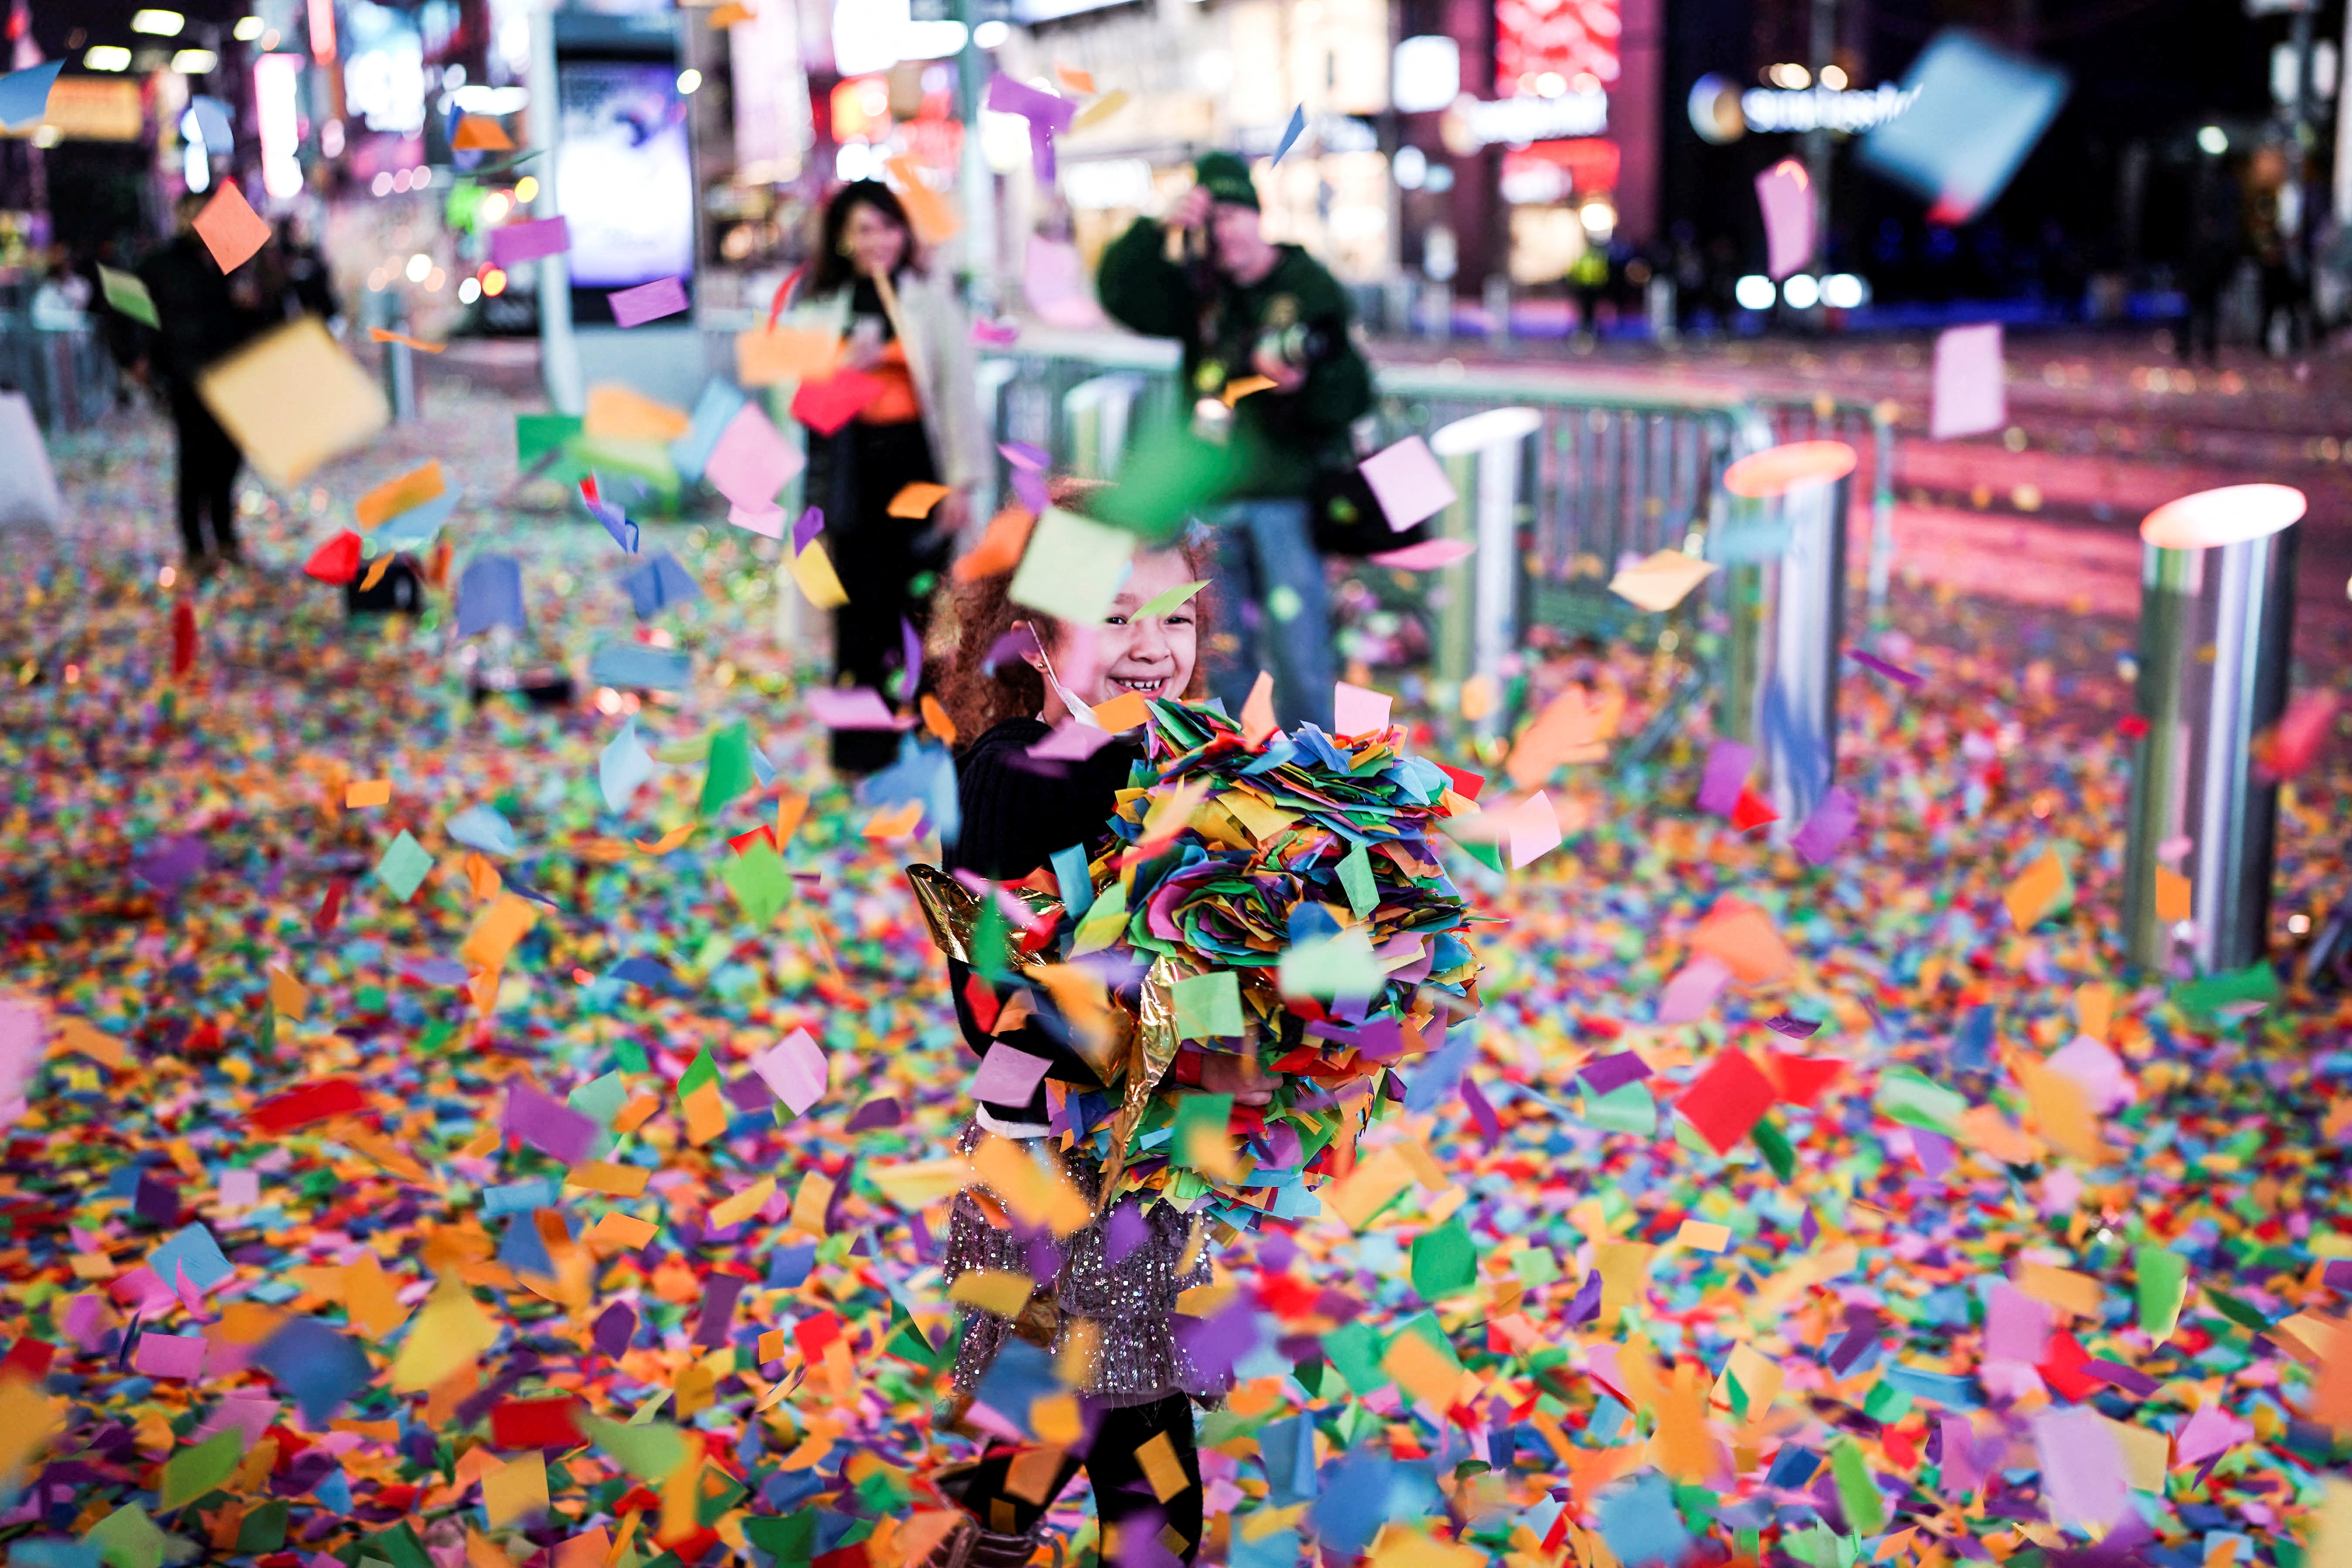 New Year's celebrations in Times Square, in New York City